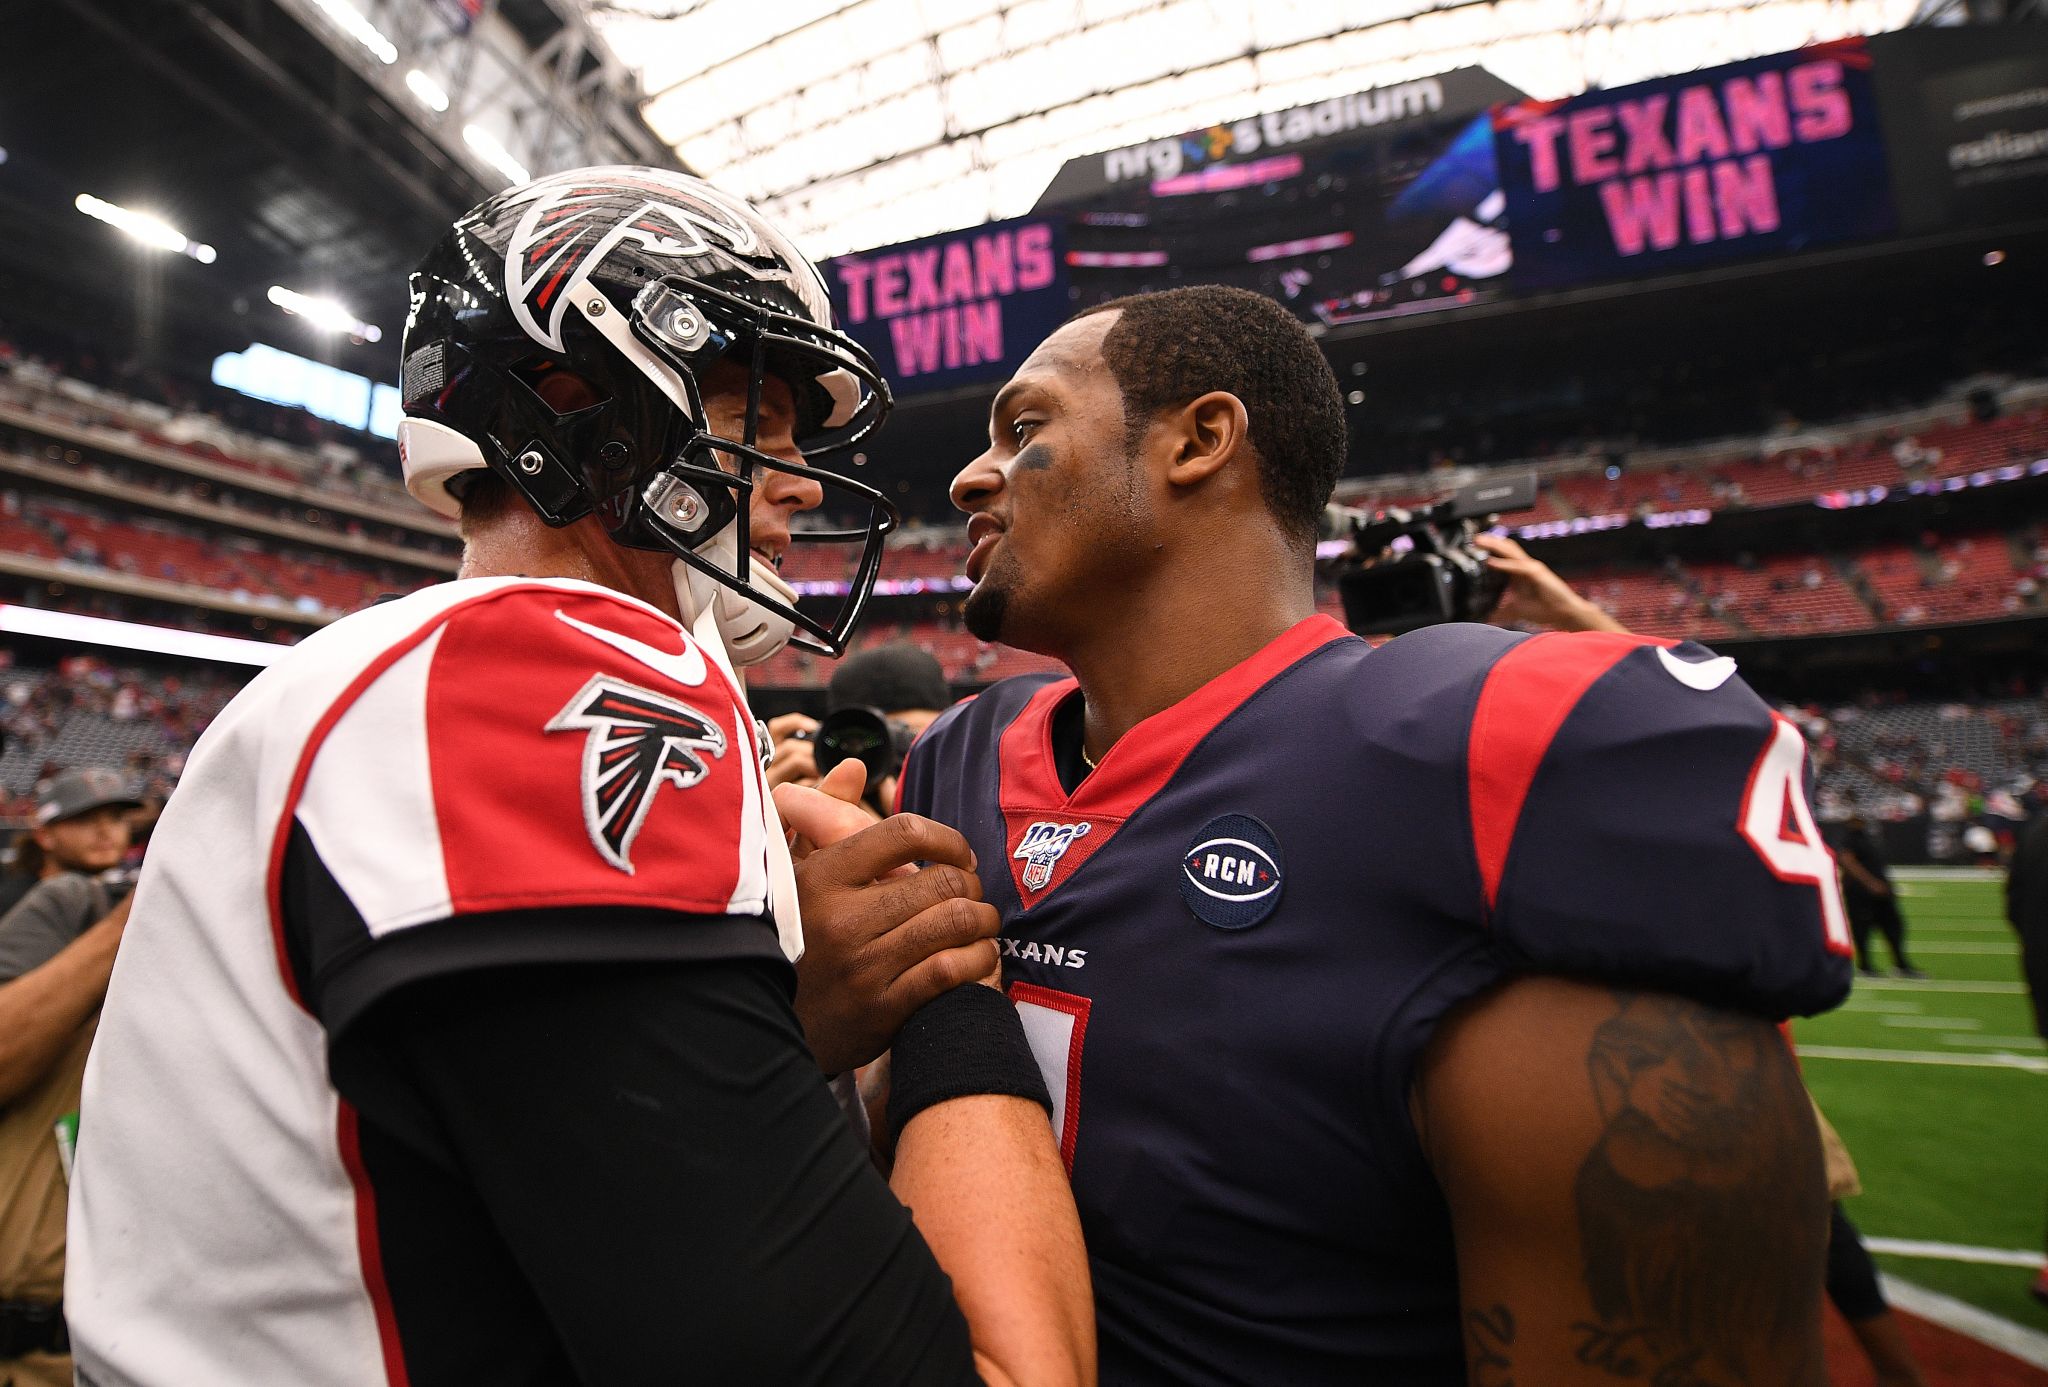 Madden 23 Ratings have a clear winner between Deshaun Watson and